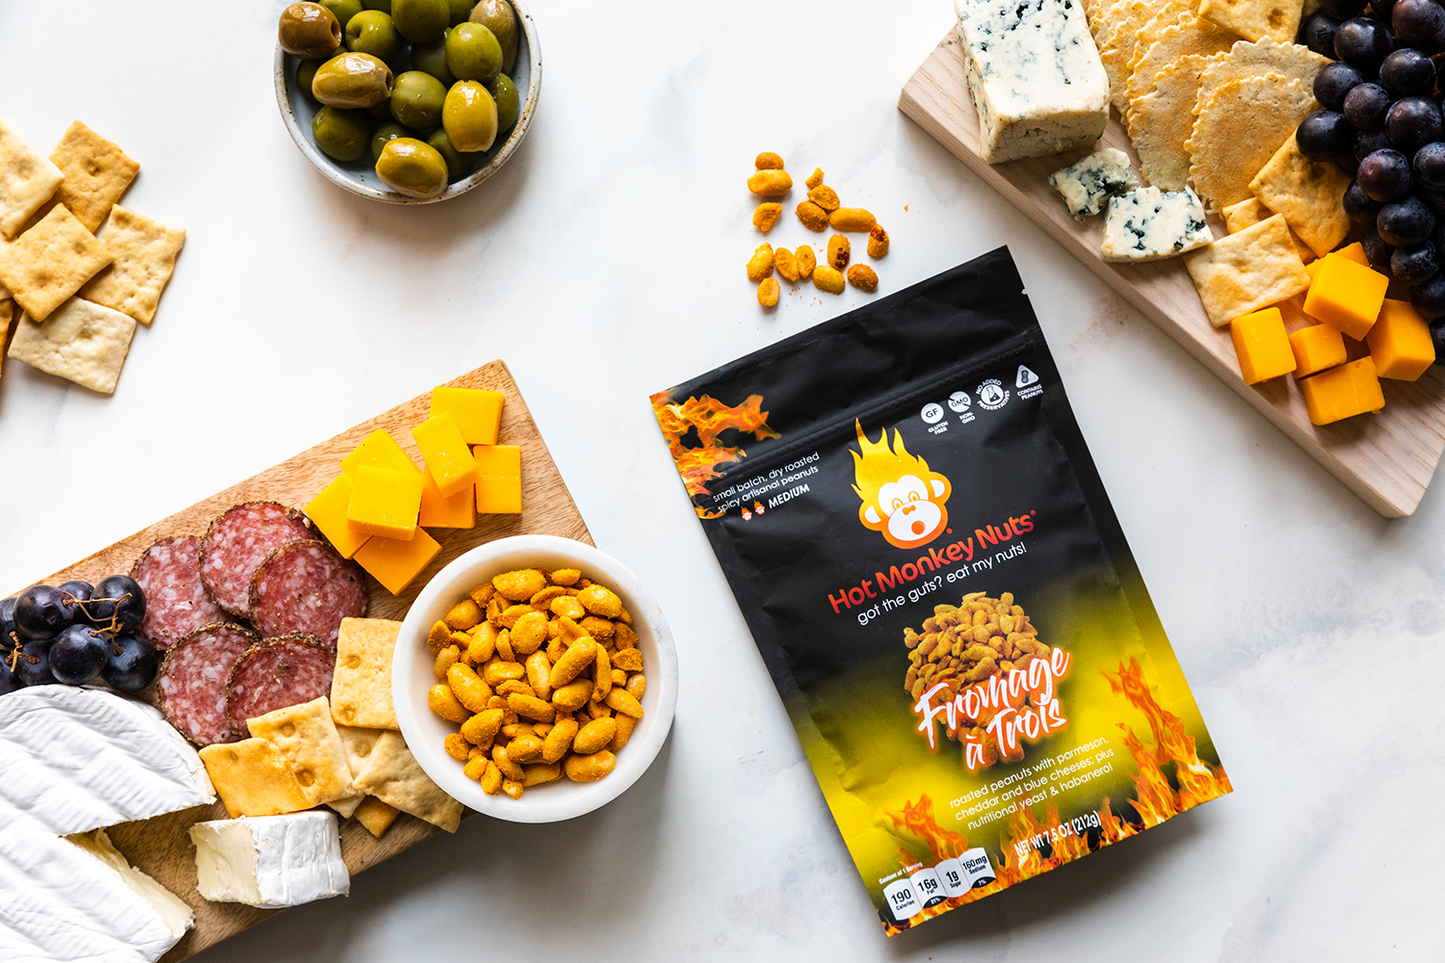 Fromage a Trois flavored spicy Hot Monkey Nuts are flavored with Cheddar, Blue, and Parmesan cheese, and Habanero